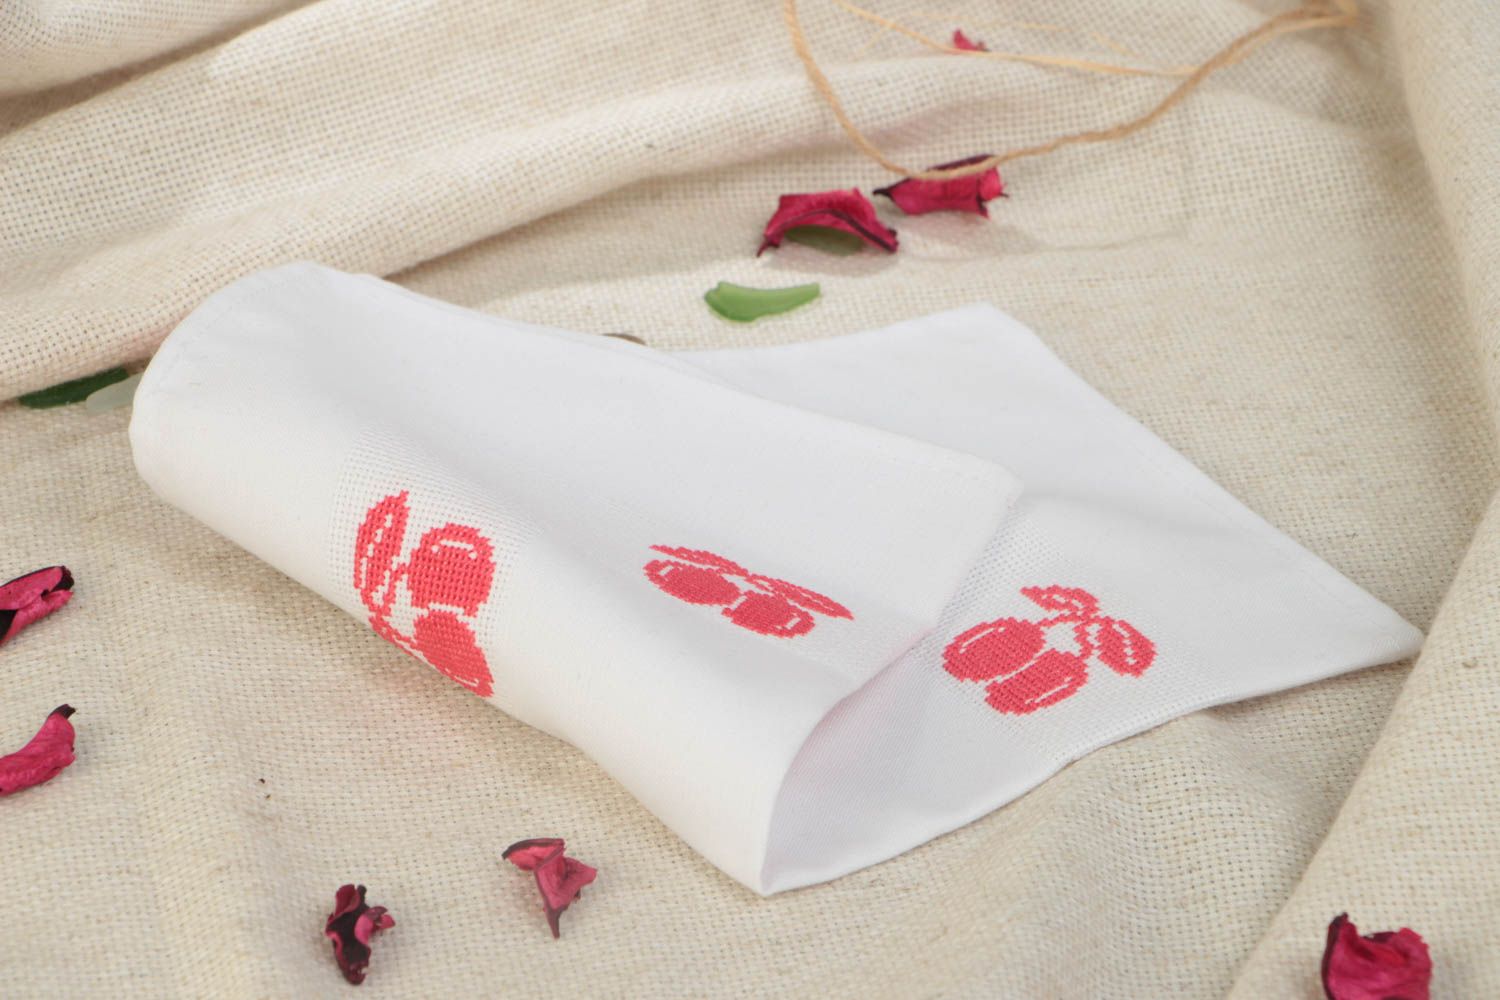 Handmade decorative white table napkin with cross stitch embroidery red cherries photo 1